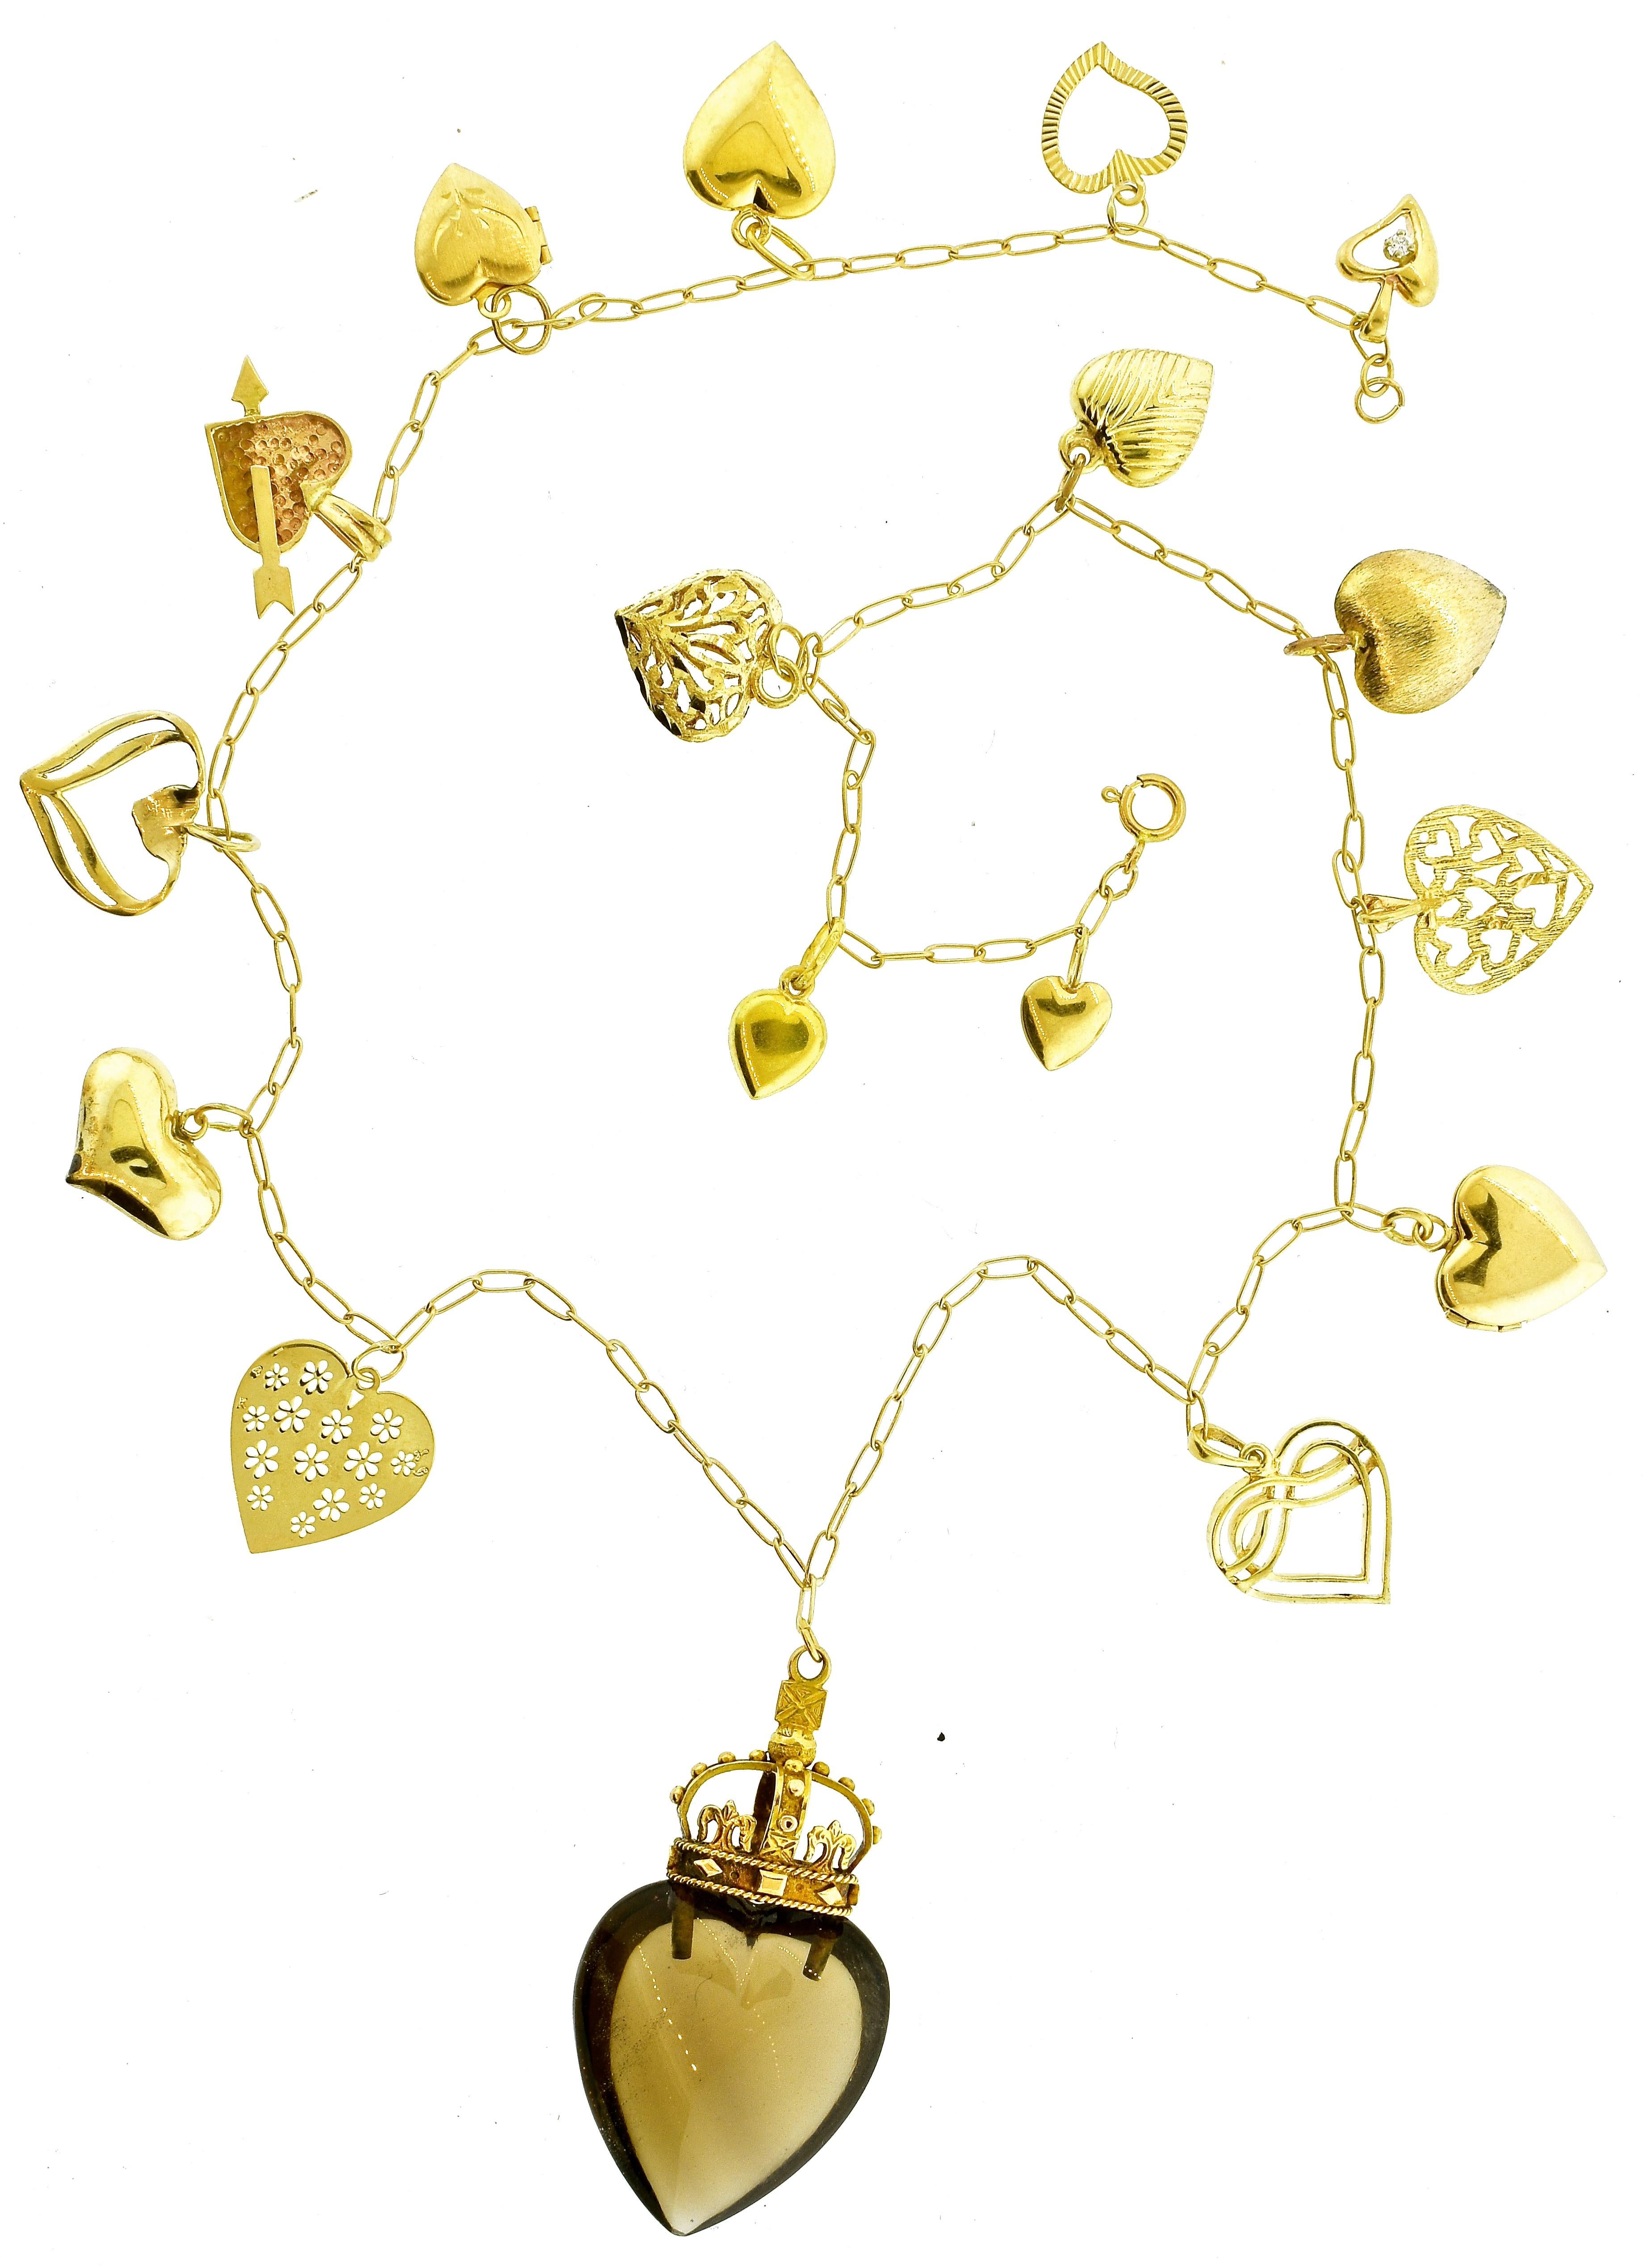 Heart motif necklace with 17 different heart motif charms. All yellow gold, one with a small white diamond, one is a locket and opens and the bottom center heart is a natural smokey quartz stone, all are unusual.  This necklace, in fine condition,